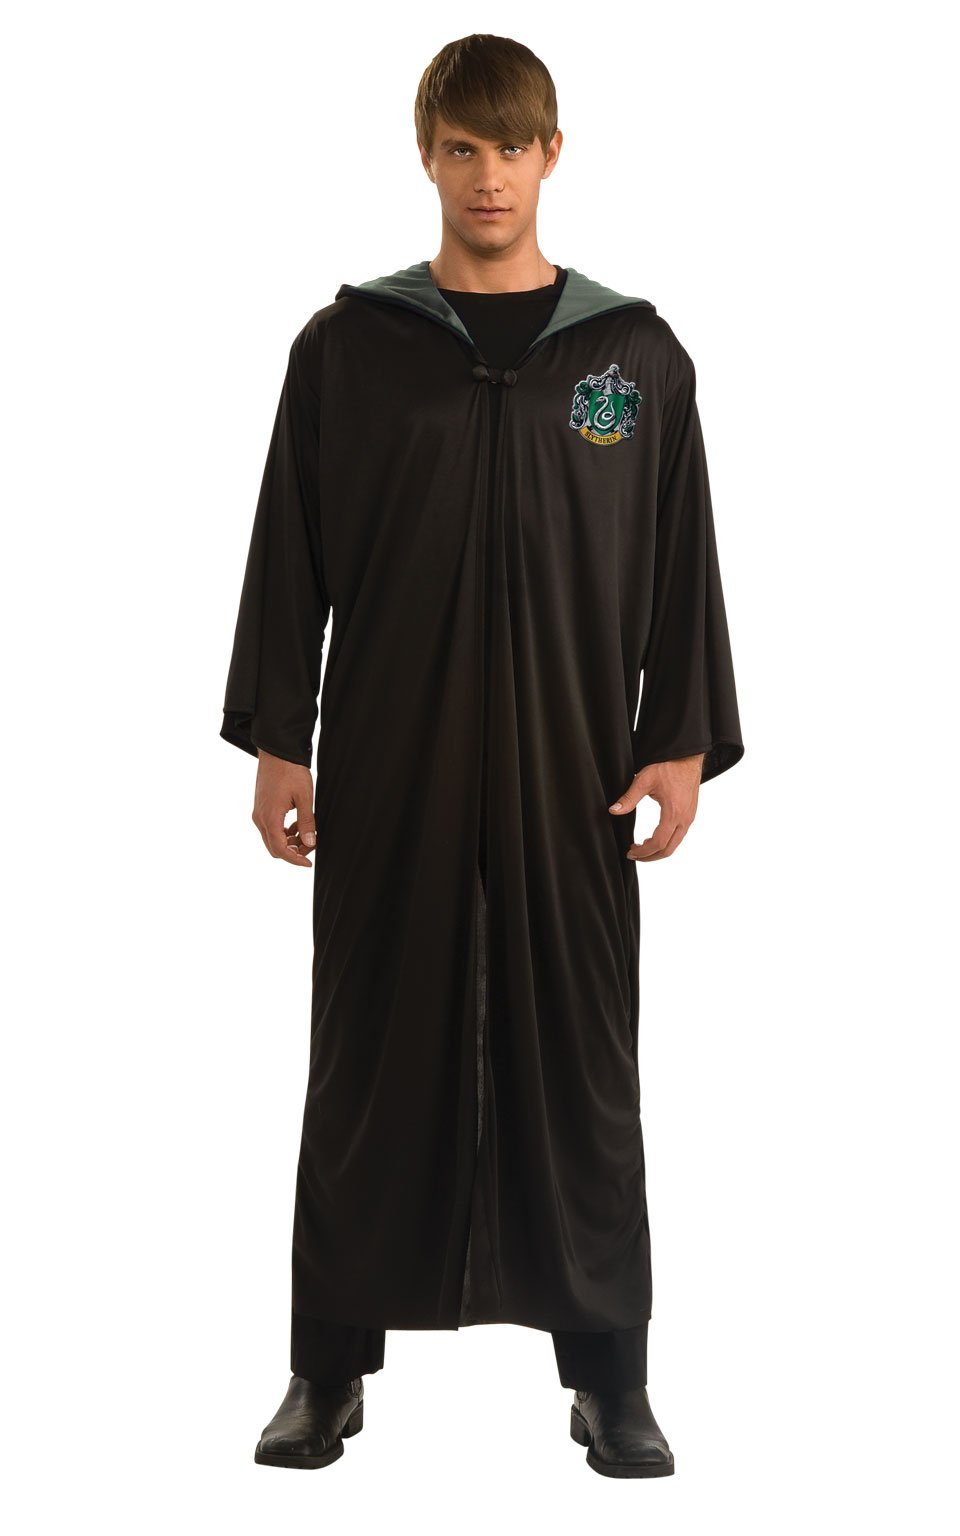 Click to view product details and reviews for Adult Harry Potter Slytherin Robe Costume.